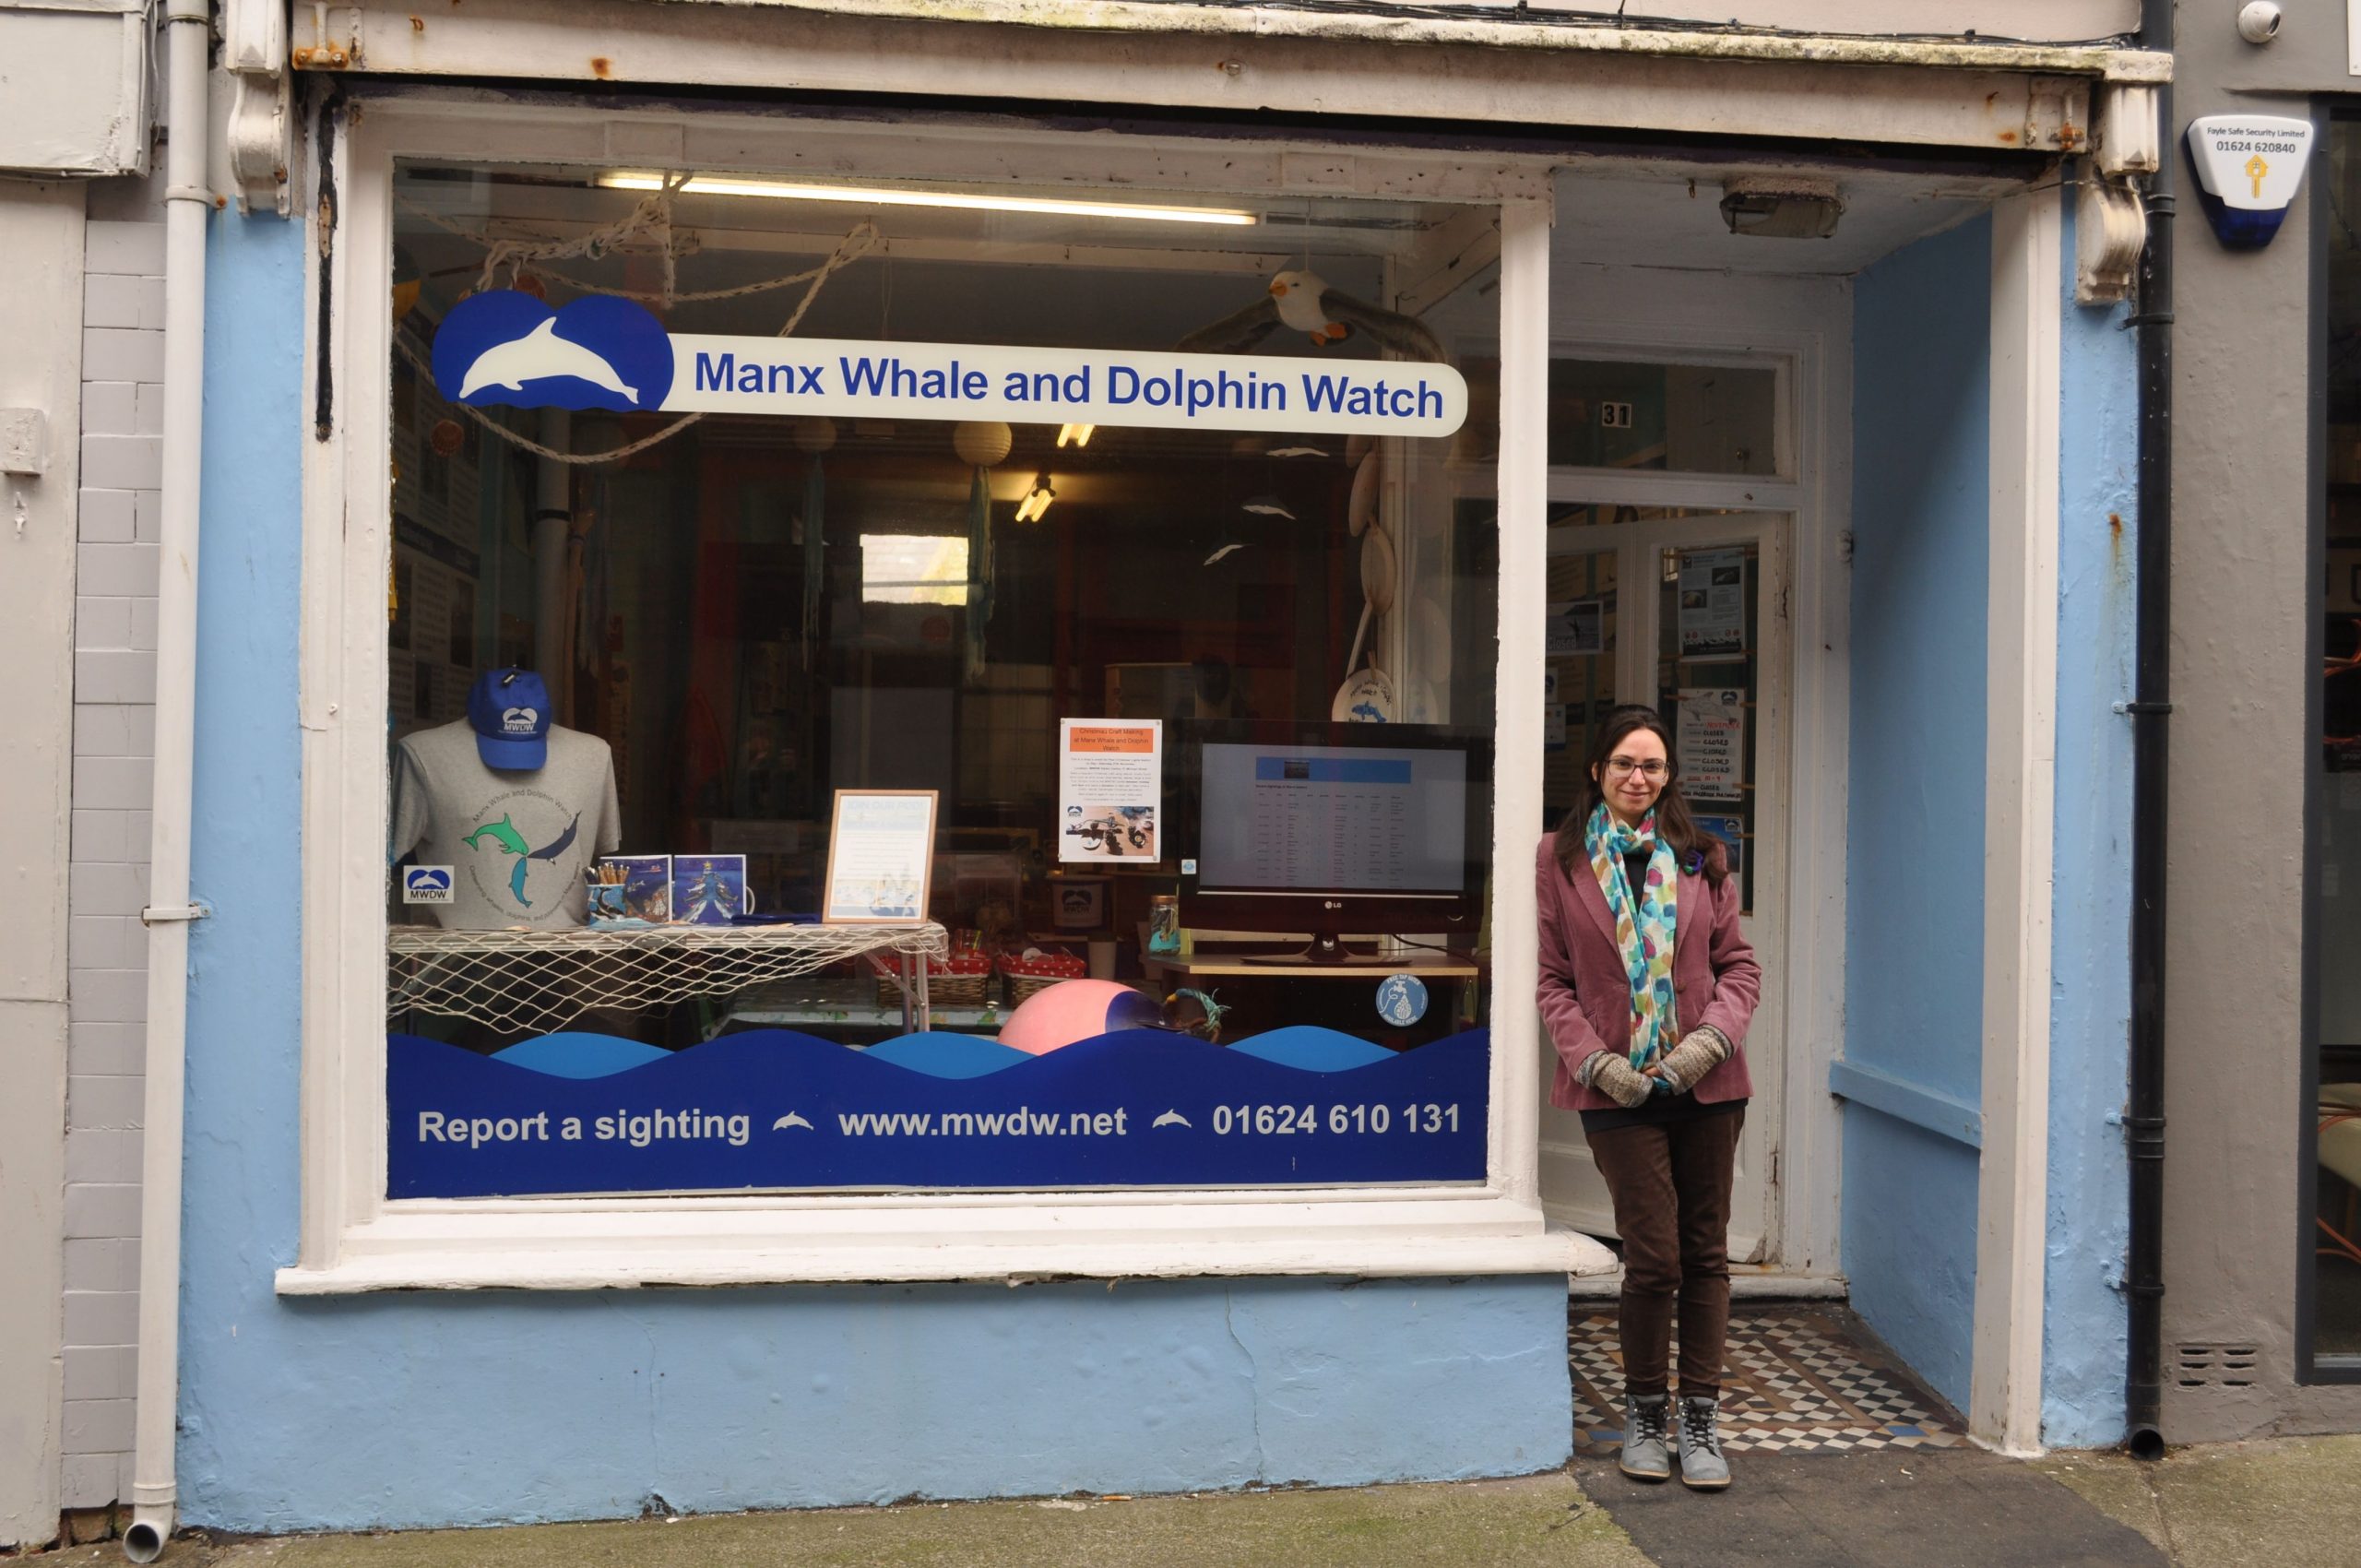 Manx Whale and Dolphin Watch